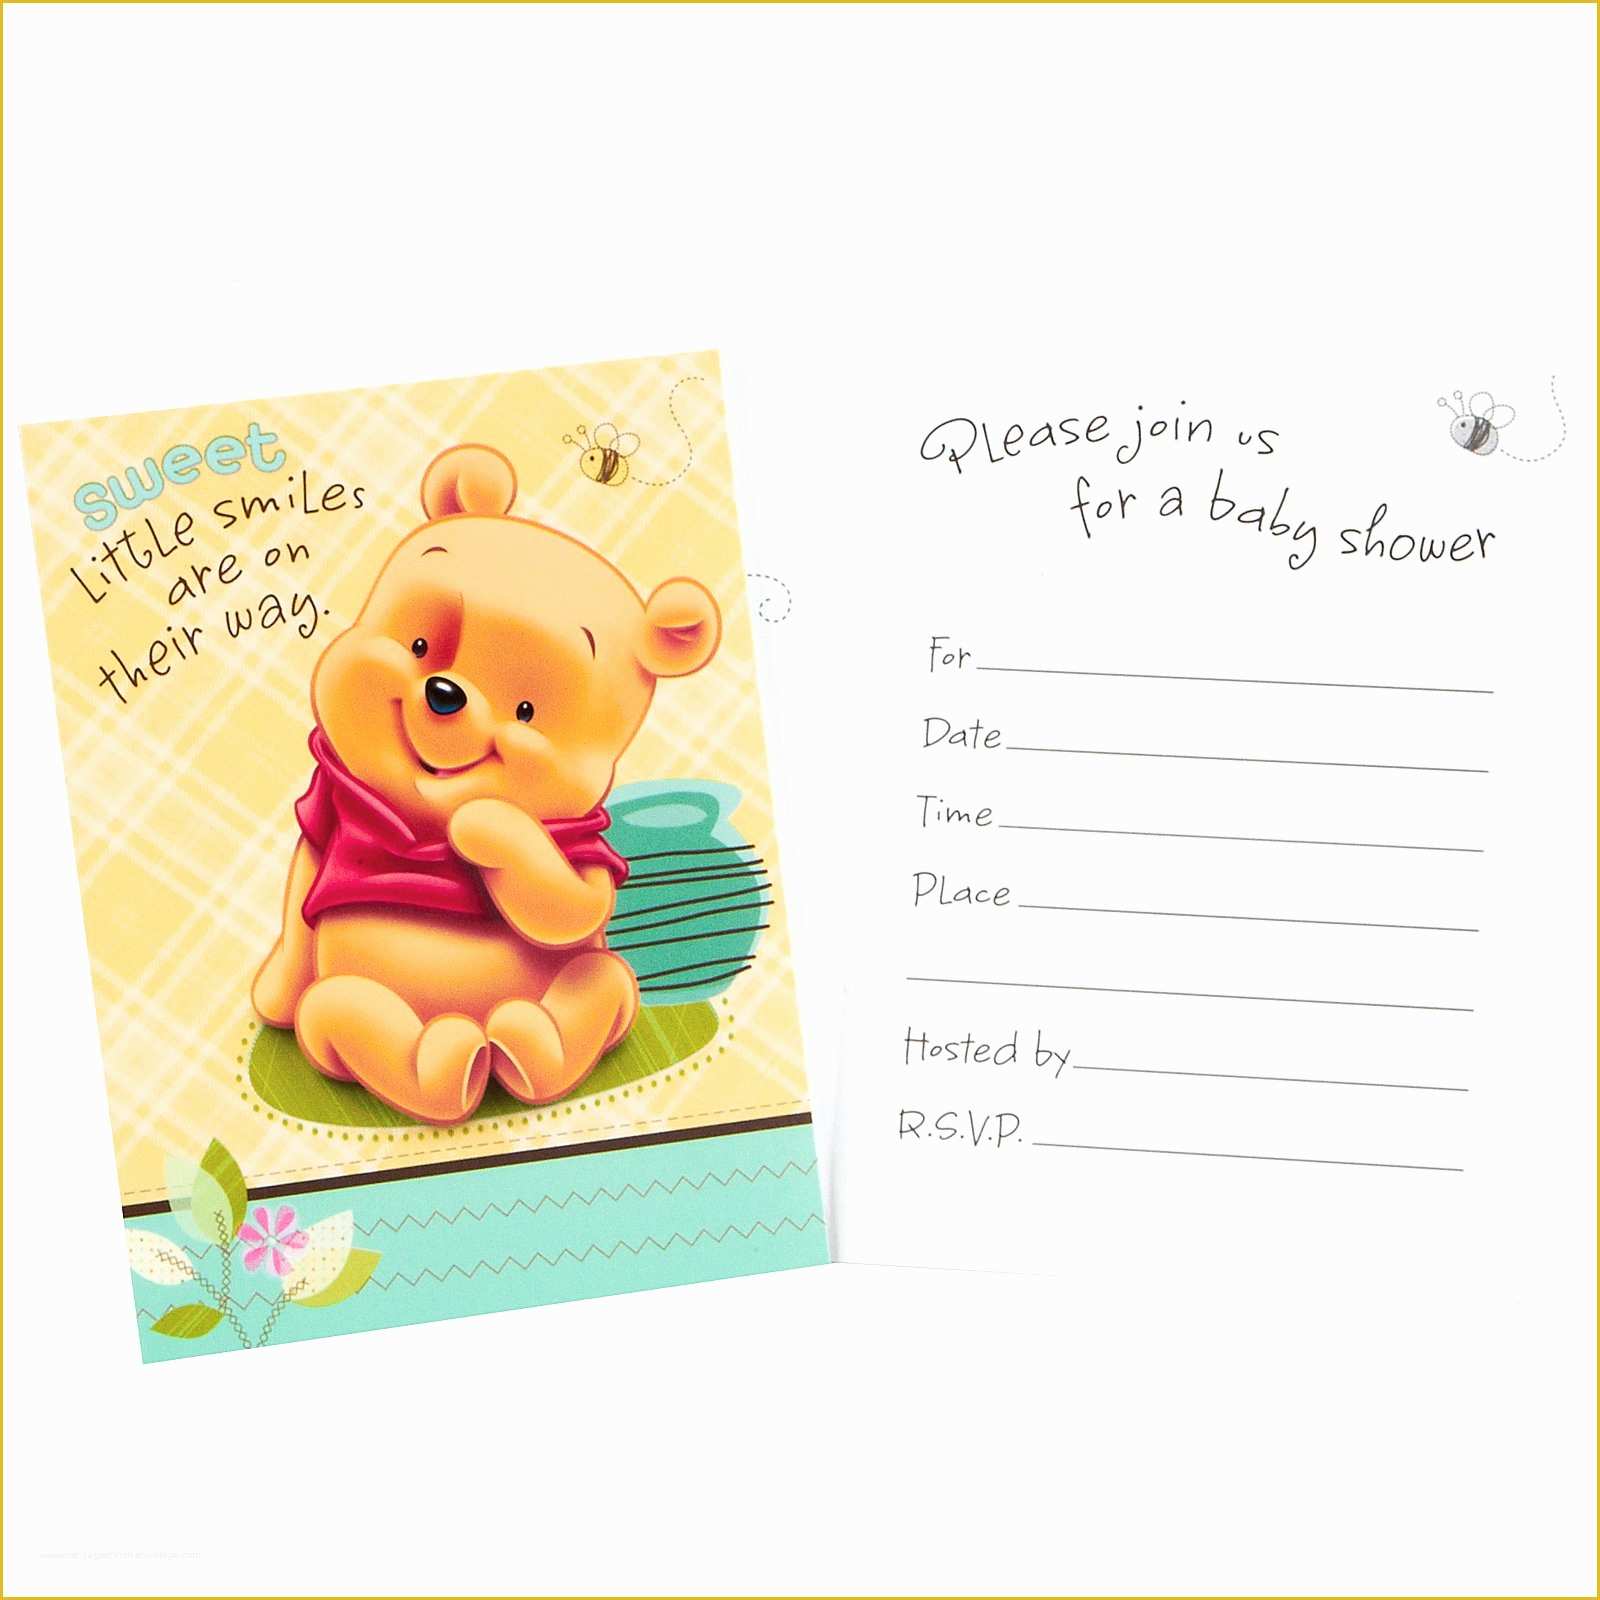 Winnie the Pooh Baby Shower Invitations Templates Free Of Winnie the Pooh Design for Your Baby Shower Invitations